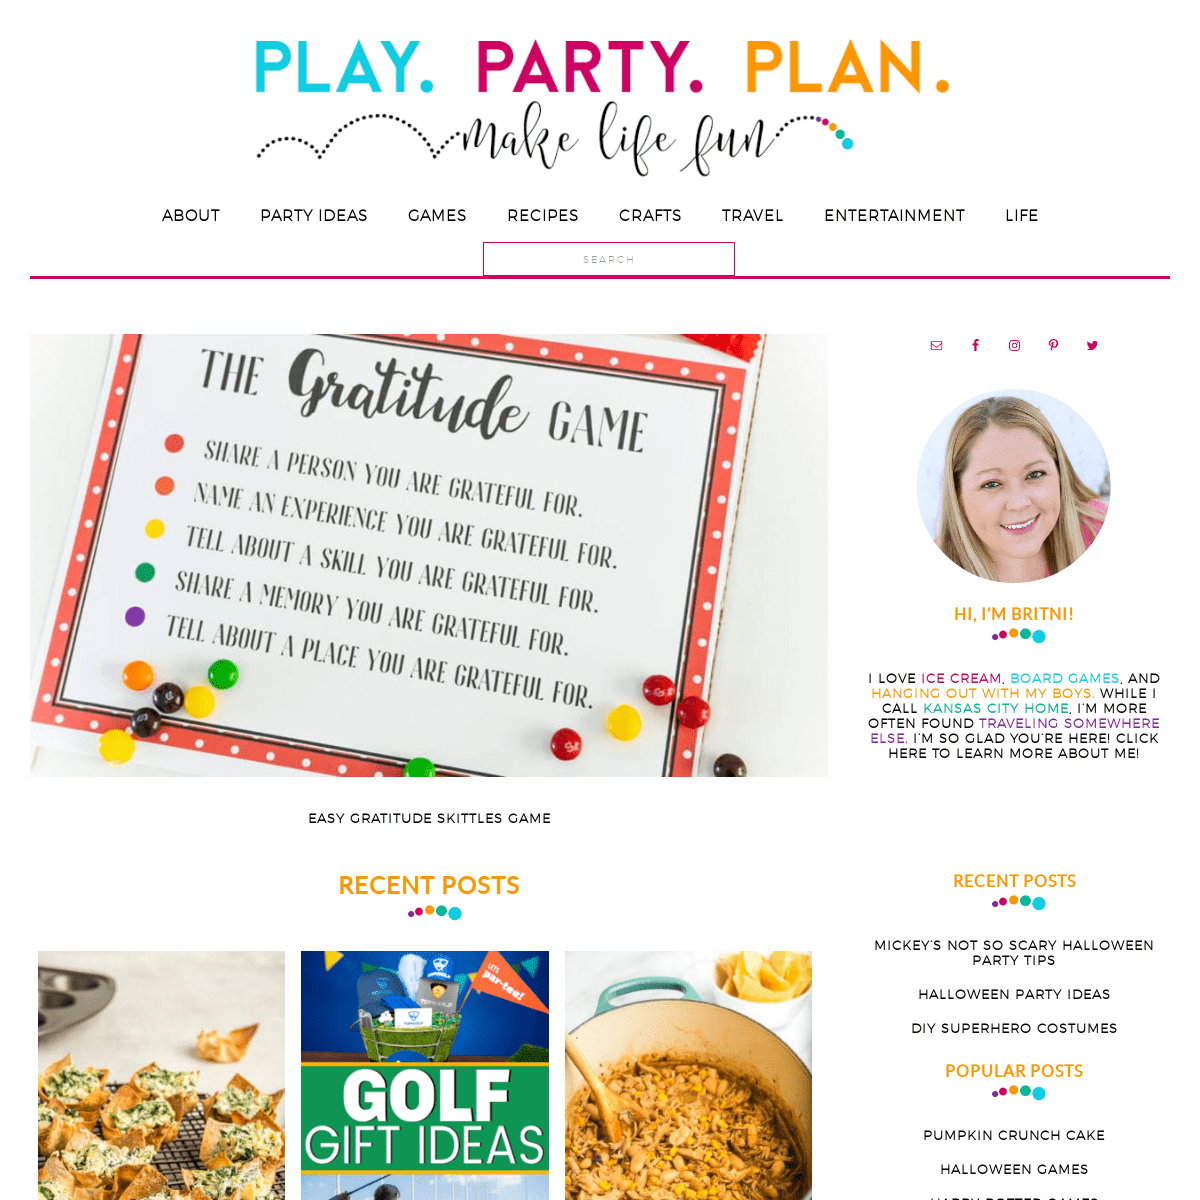 A complete backup of playpartyplan.com